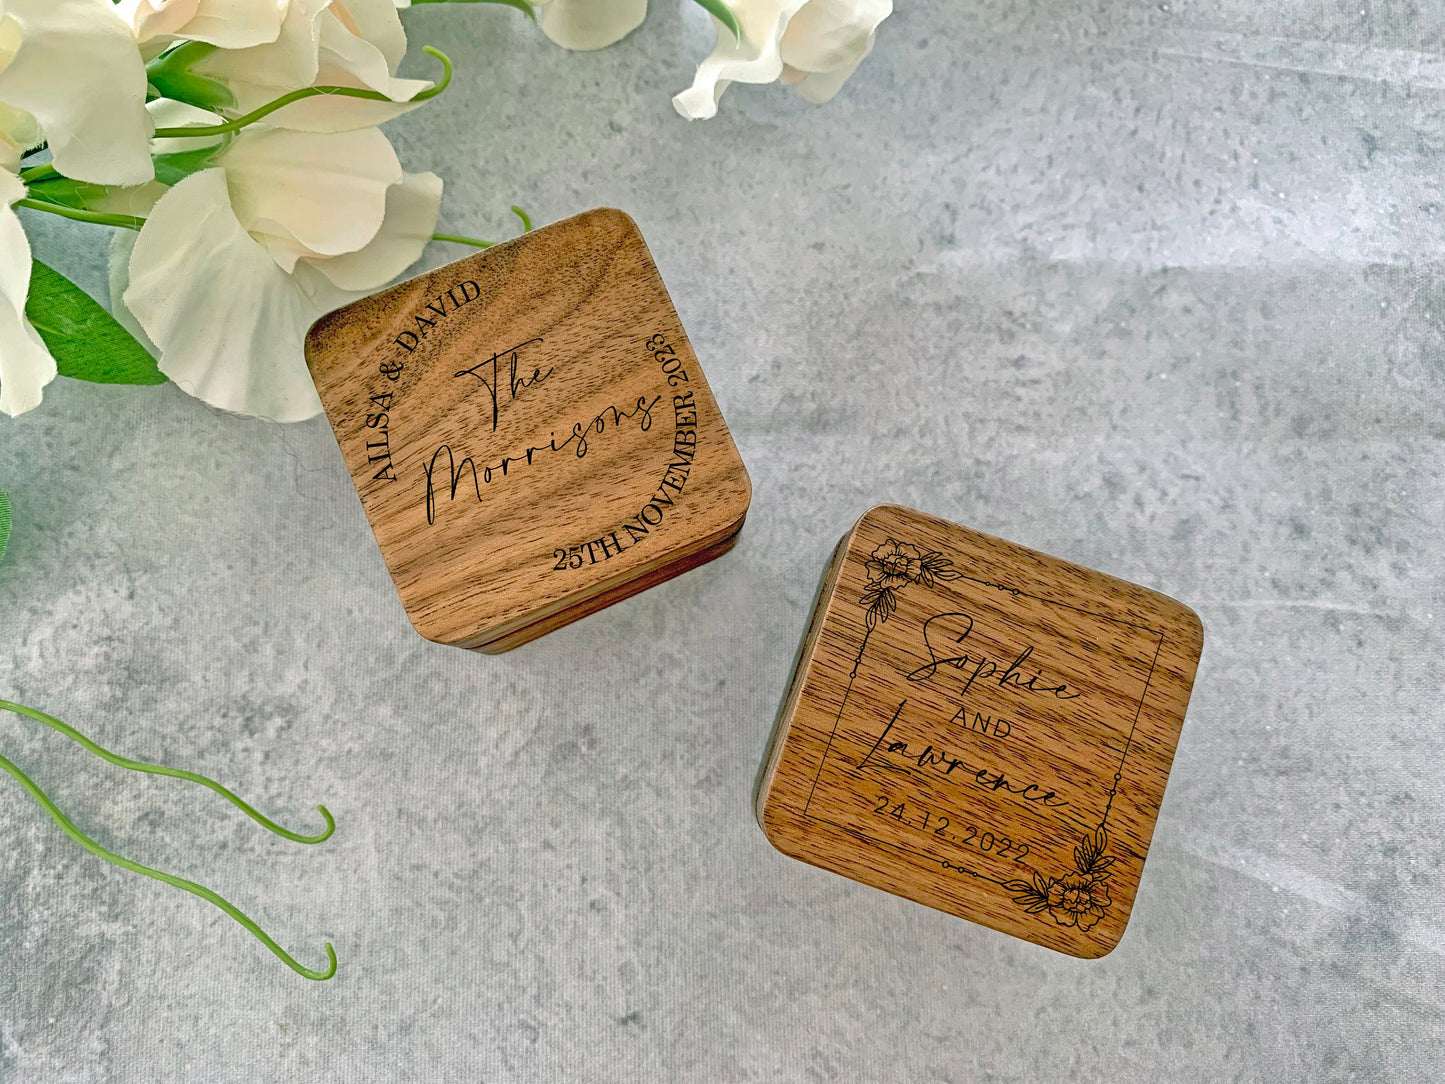 Personalised Square Engraved Wooden Wedding Ring Box, Engagement Ring Box with Peonies, Floral Ring Box - Resplendent Aurora